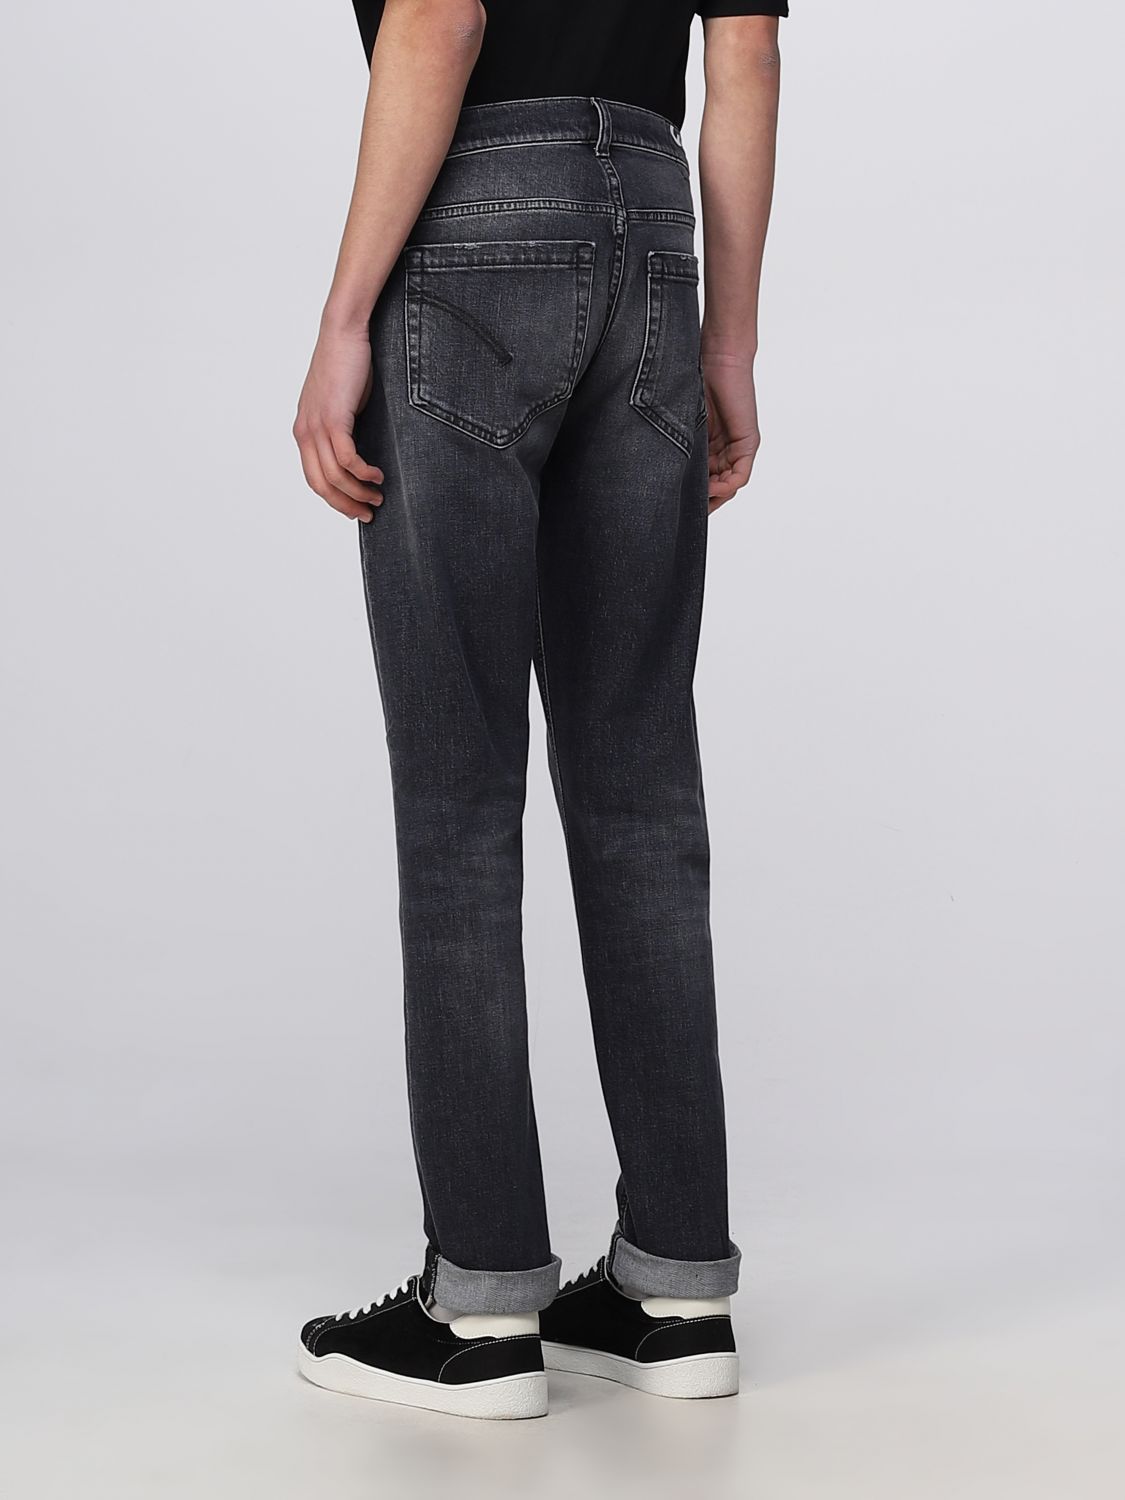 perspectief Simuleren schotel DONDUP: jeans for man - Black | Dondup jeans UP232DS0215UFL3 online on  GIGLIO.COM